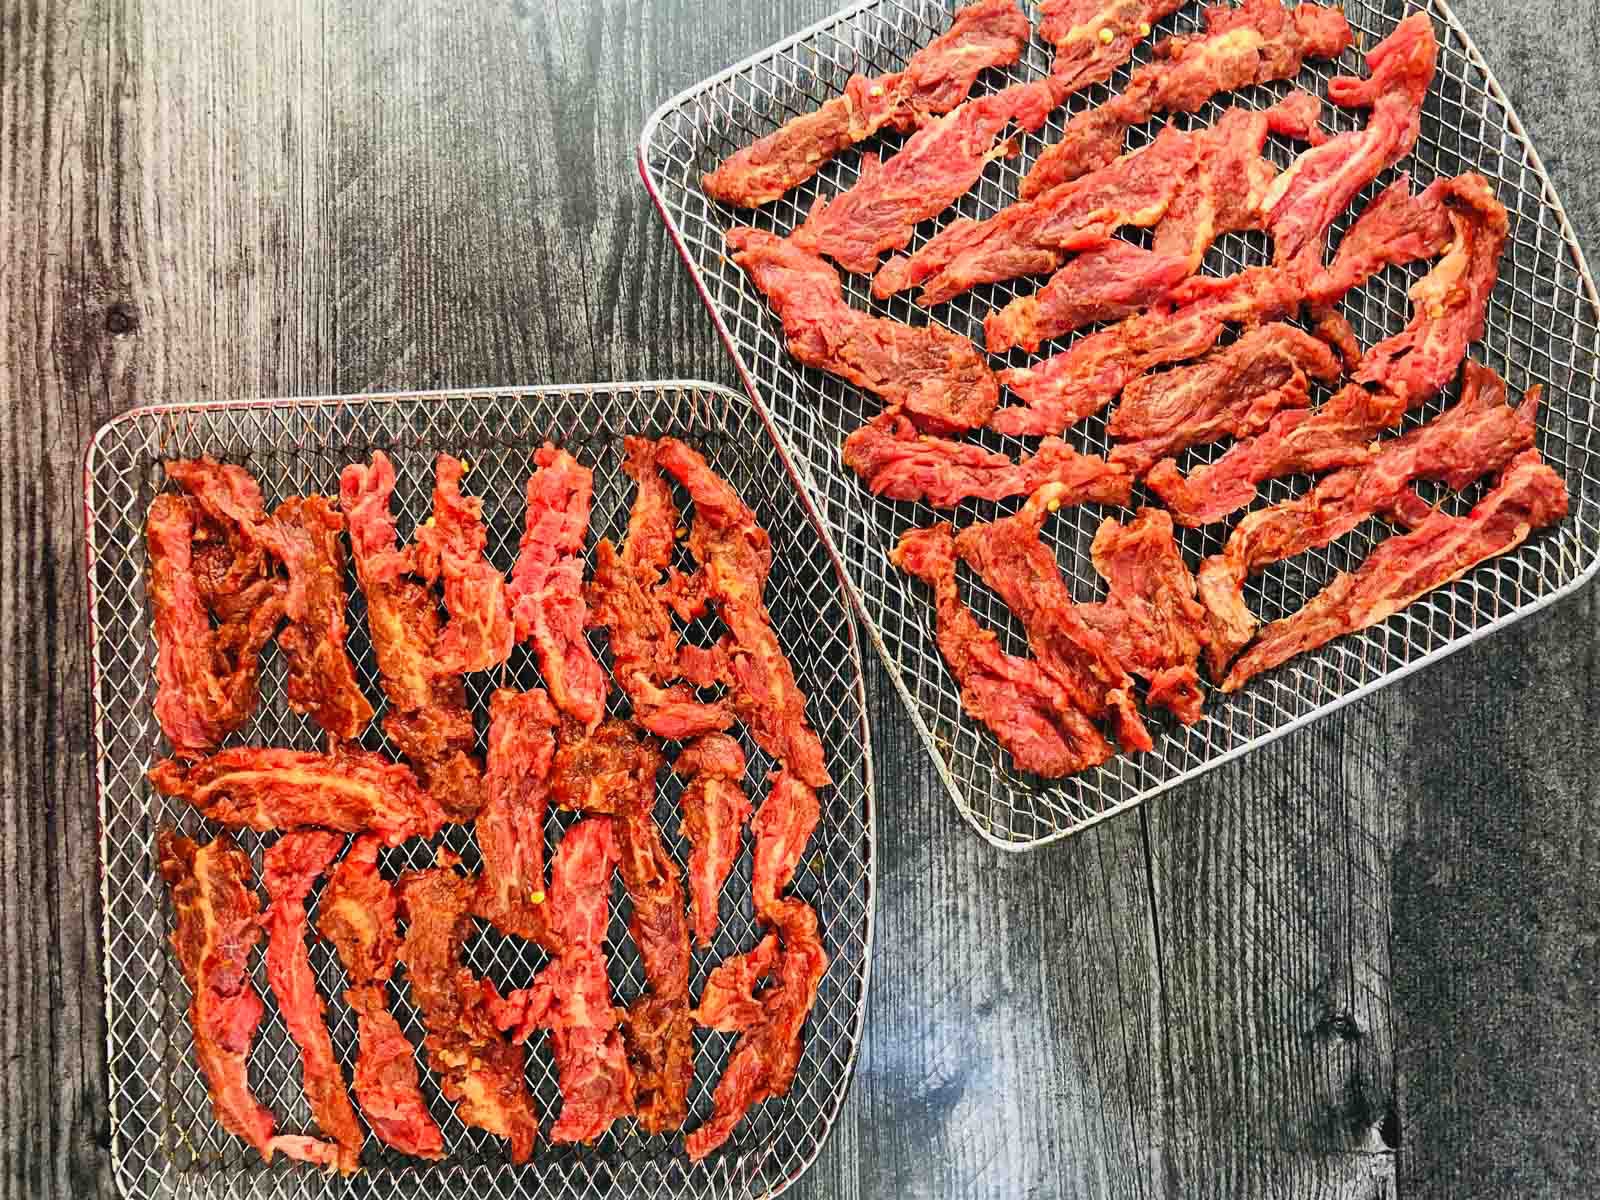 air fryer racks with raw pieces of marinate beef 